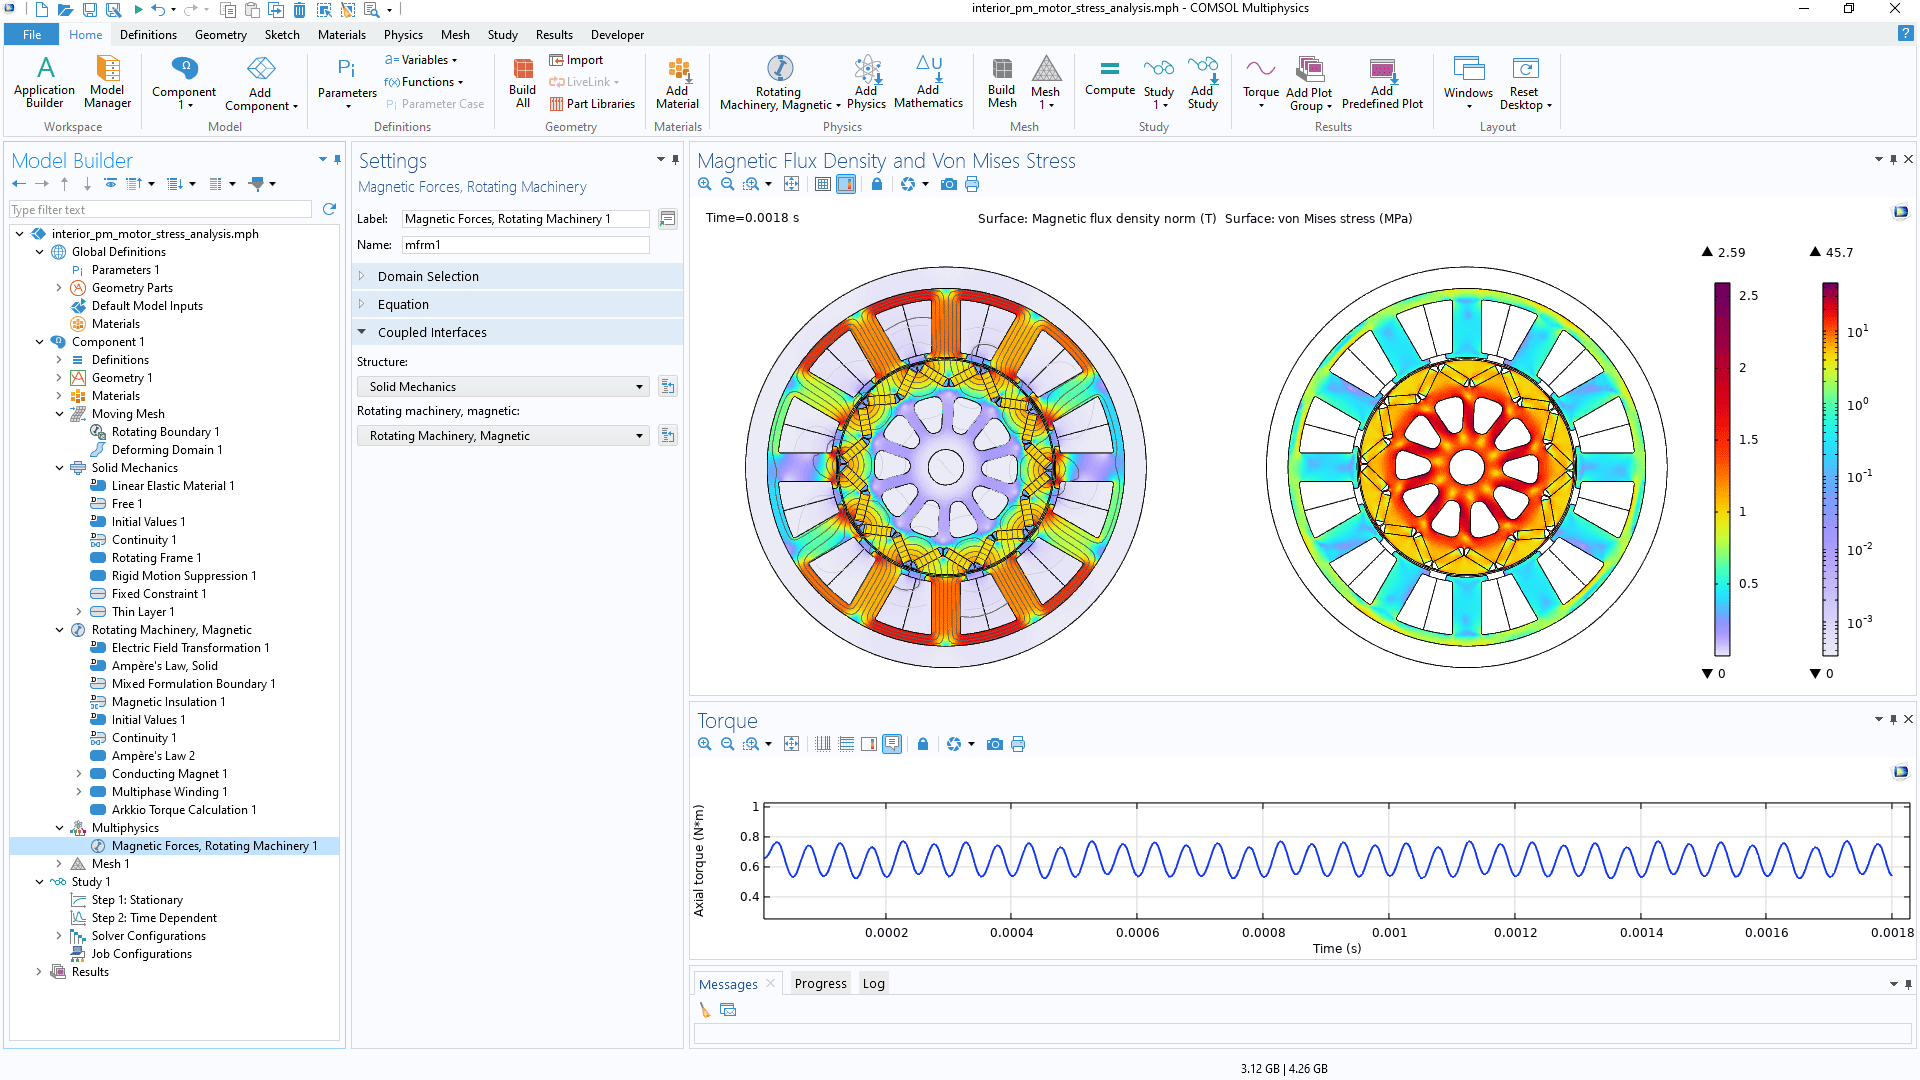 The COMSOL Multiphysics UI showing the Model Builder with the Magnetic Forces, Rotating Machinery node highlighted; the corresponding Settings window; two motors in a Graphics window; and a 1D plot.